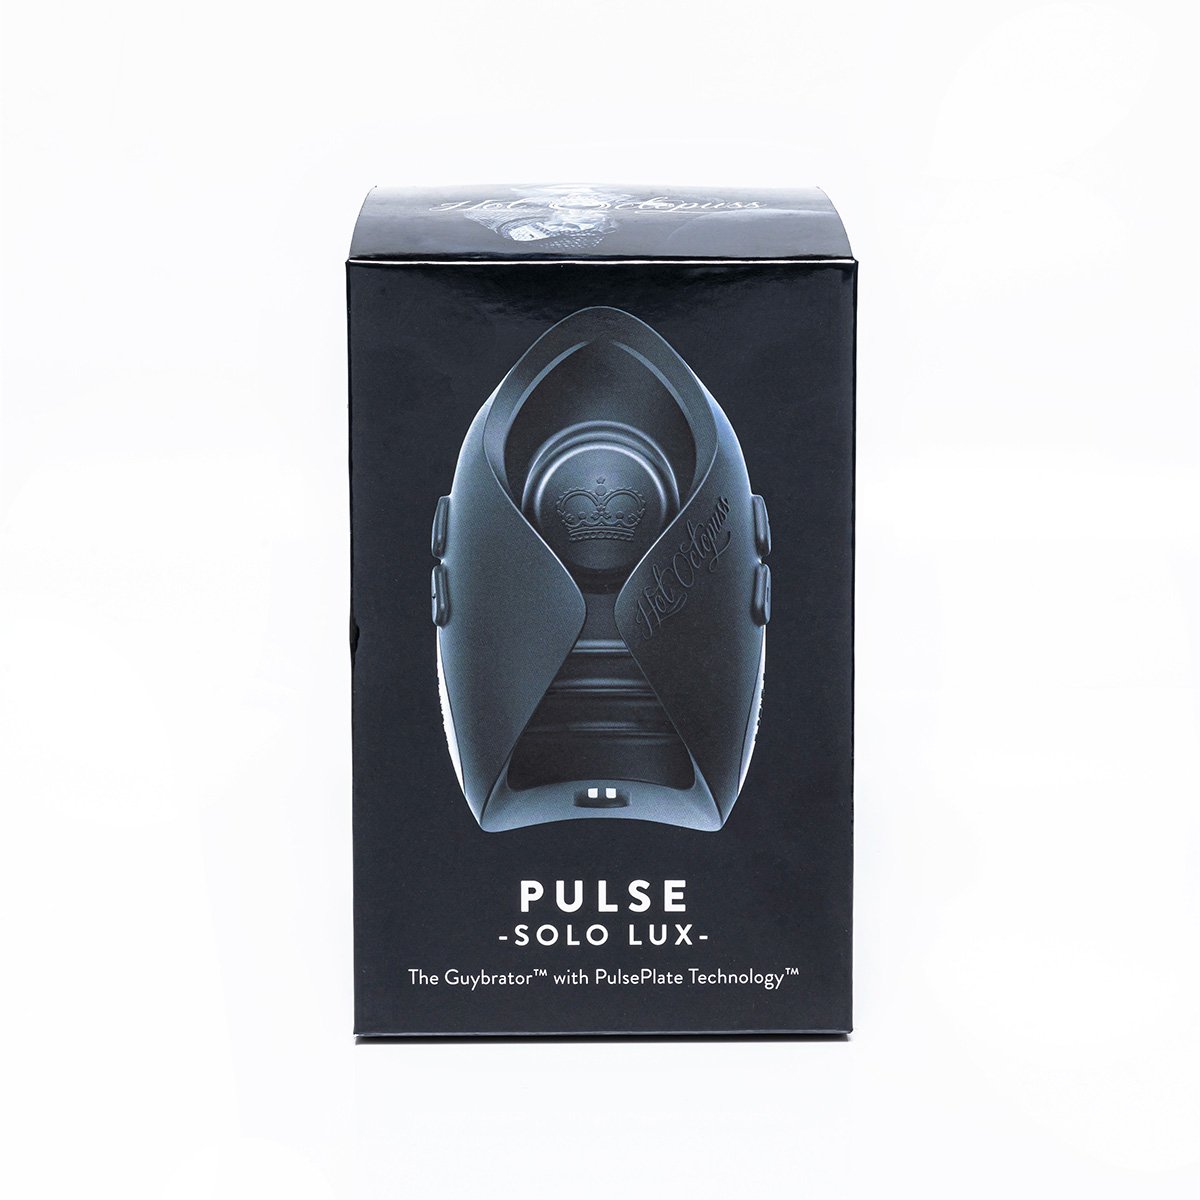 Hot Octopuss Pulse Solo Lux - Buy At Luxury Toy X - Free 3-Day Shipping